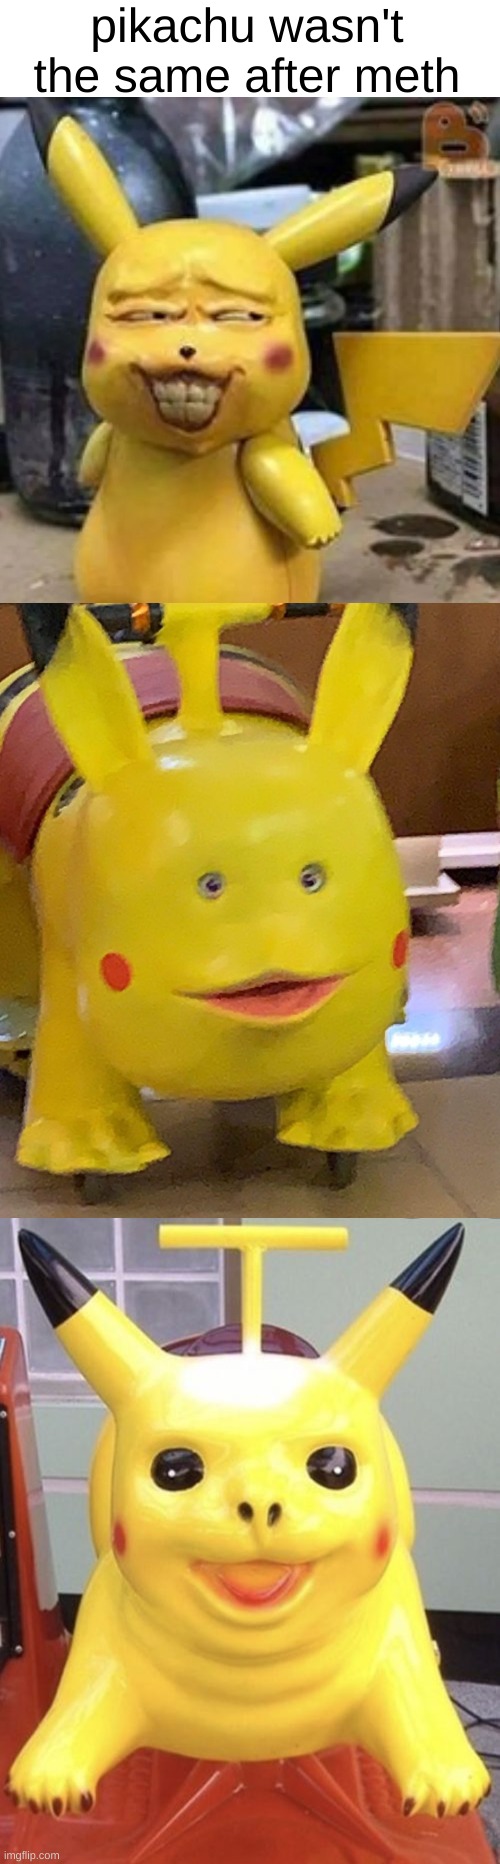 i do be lovin voldemort pikachu | pikachu wasn't the same after meth | image tagged in blank white template,cursed image | made w/ Imgflip meme maker